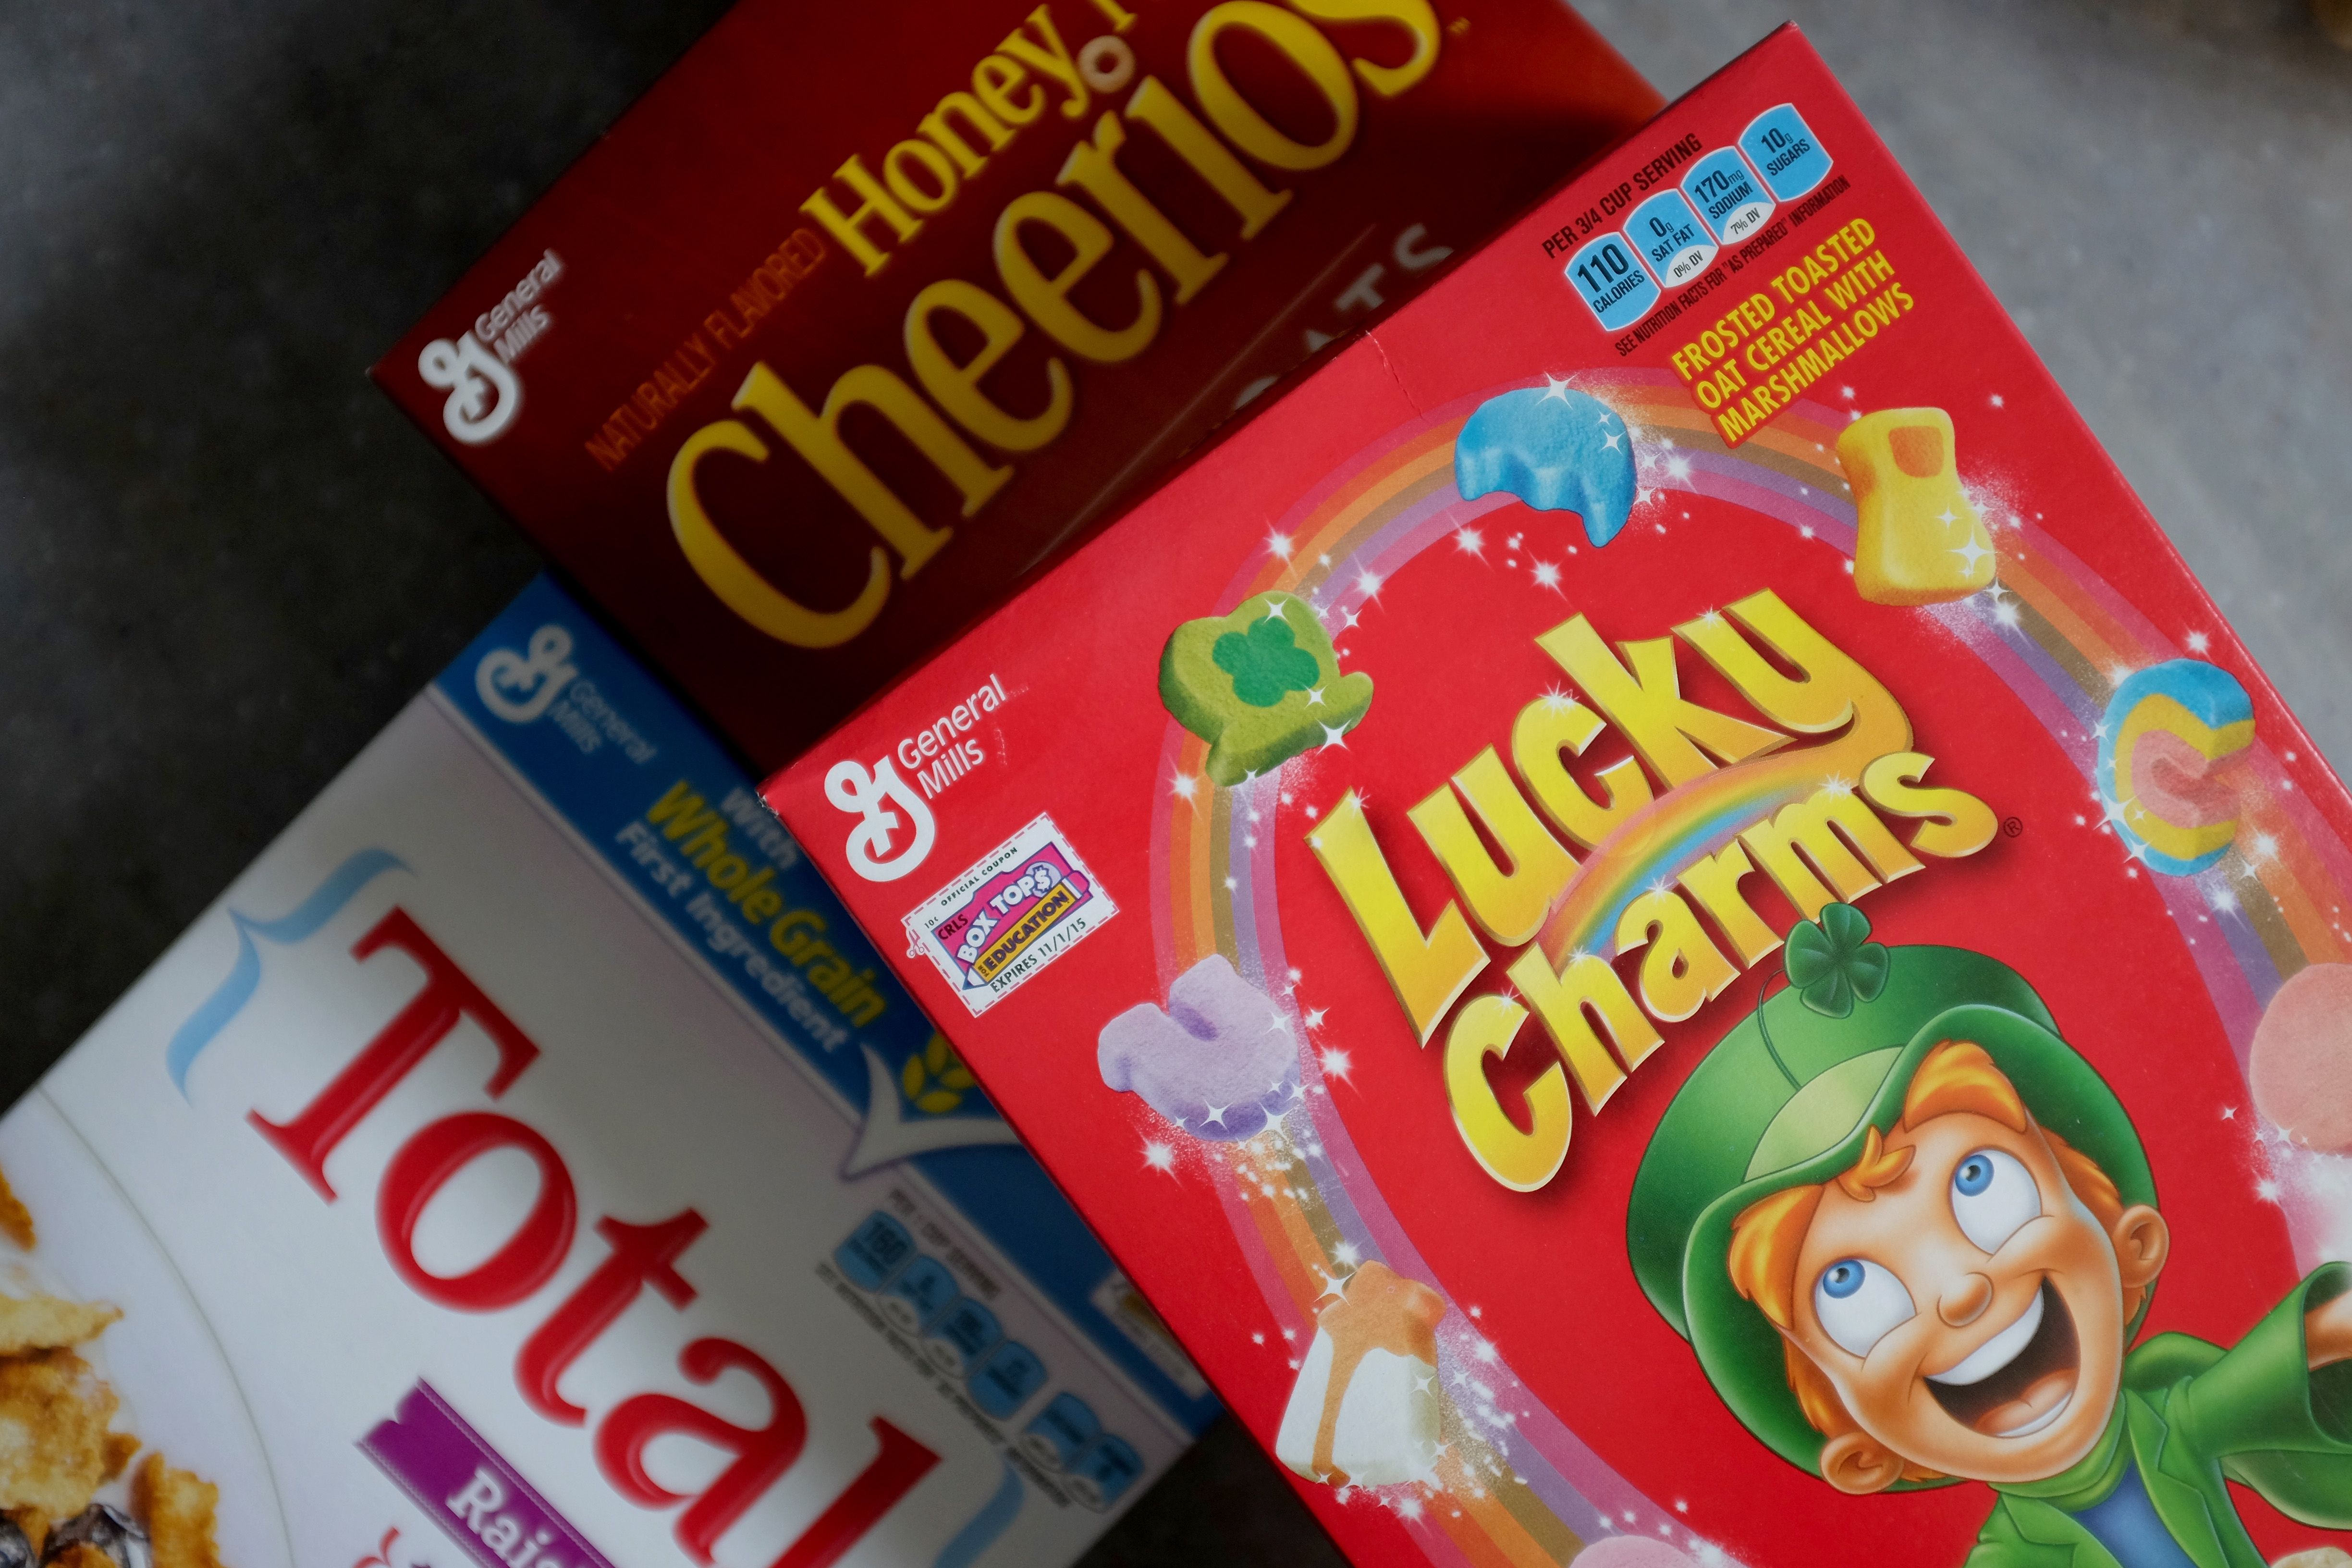 Cheerios maker General Mills stock tumbles after sales disappoint